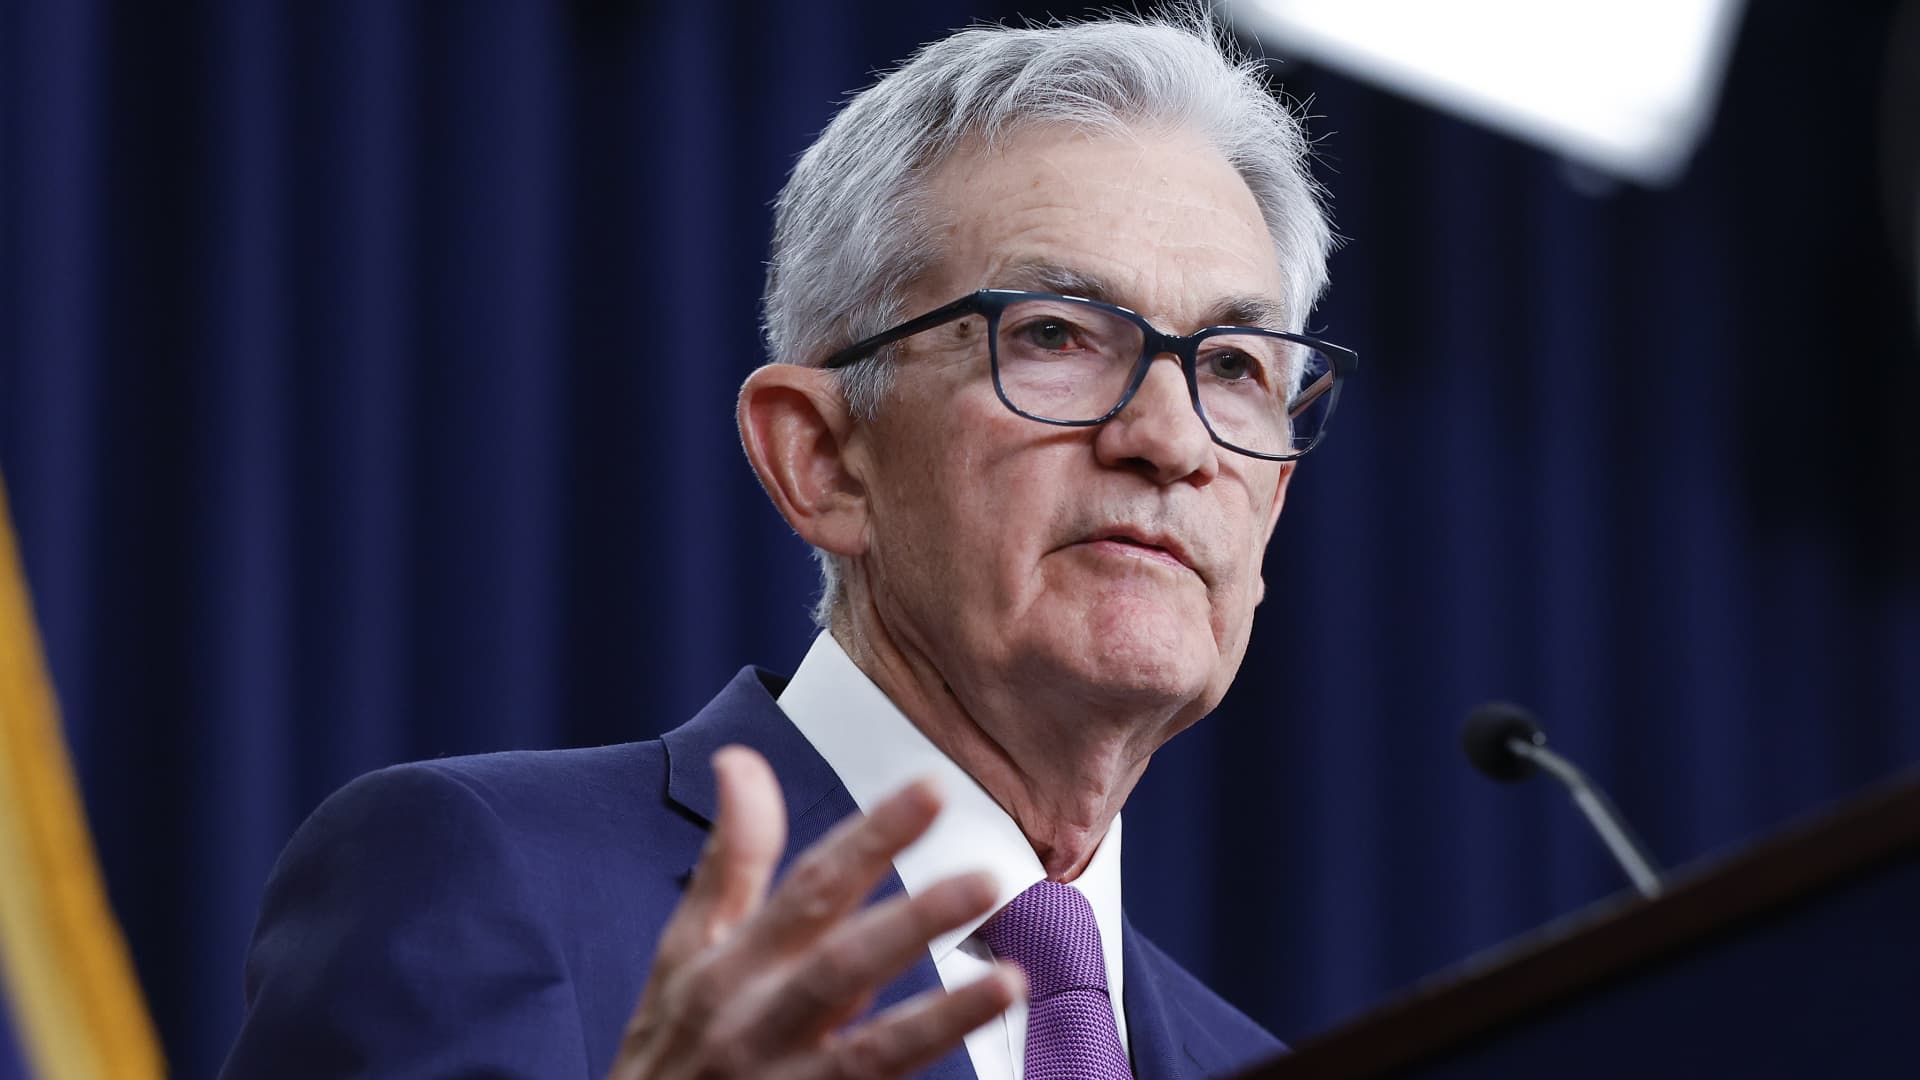 Fed Chair Powell and jobs data take center stage next week as Wall Street weighs interest rate outlook